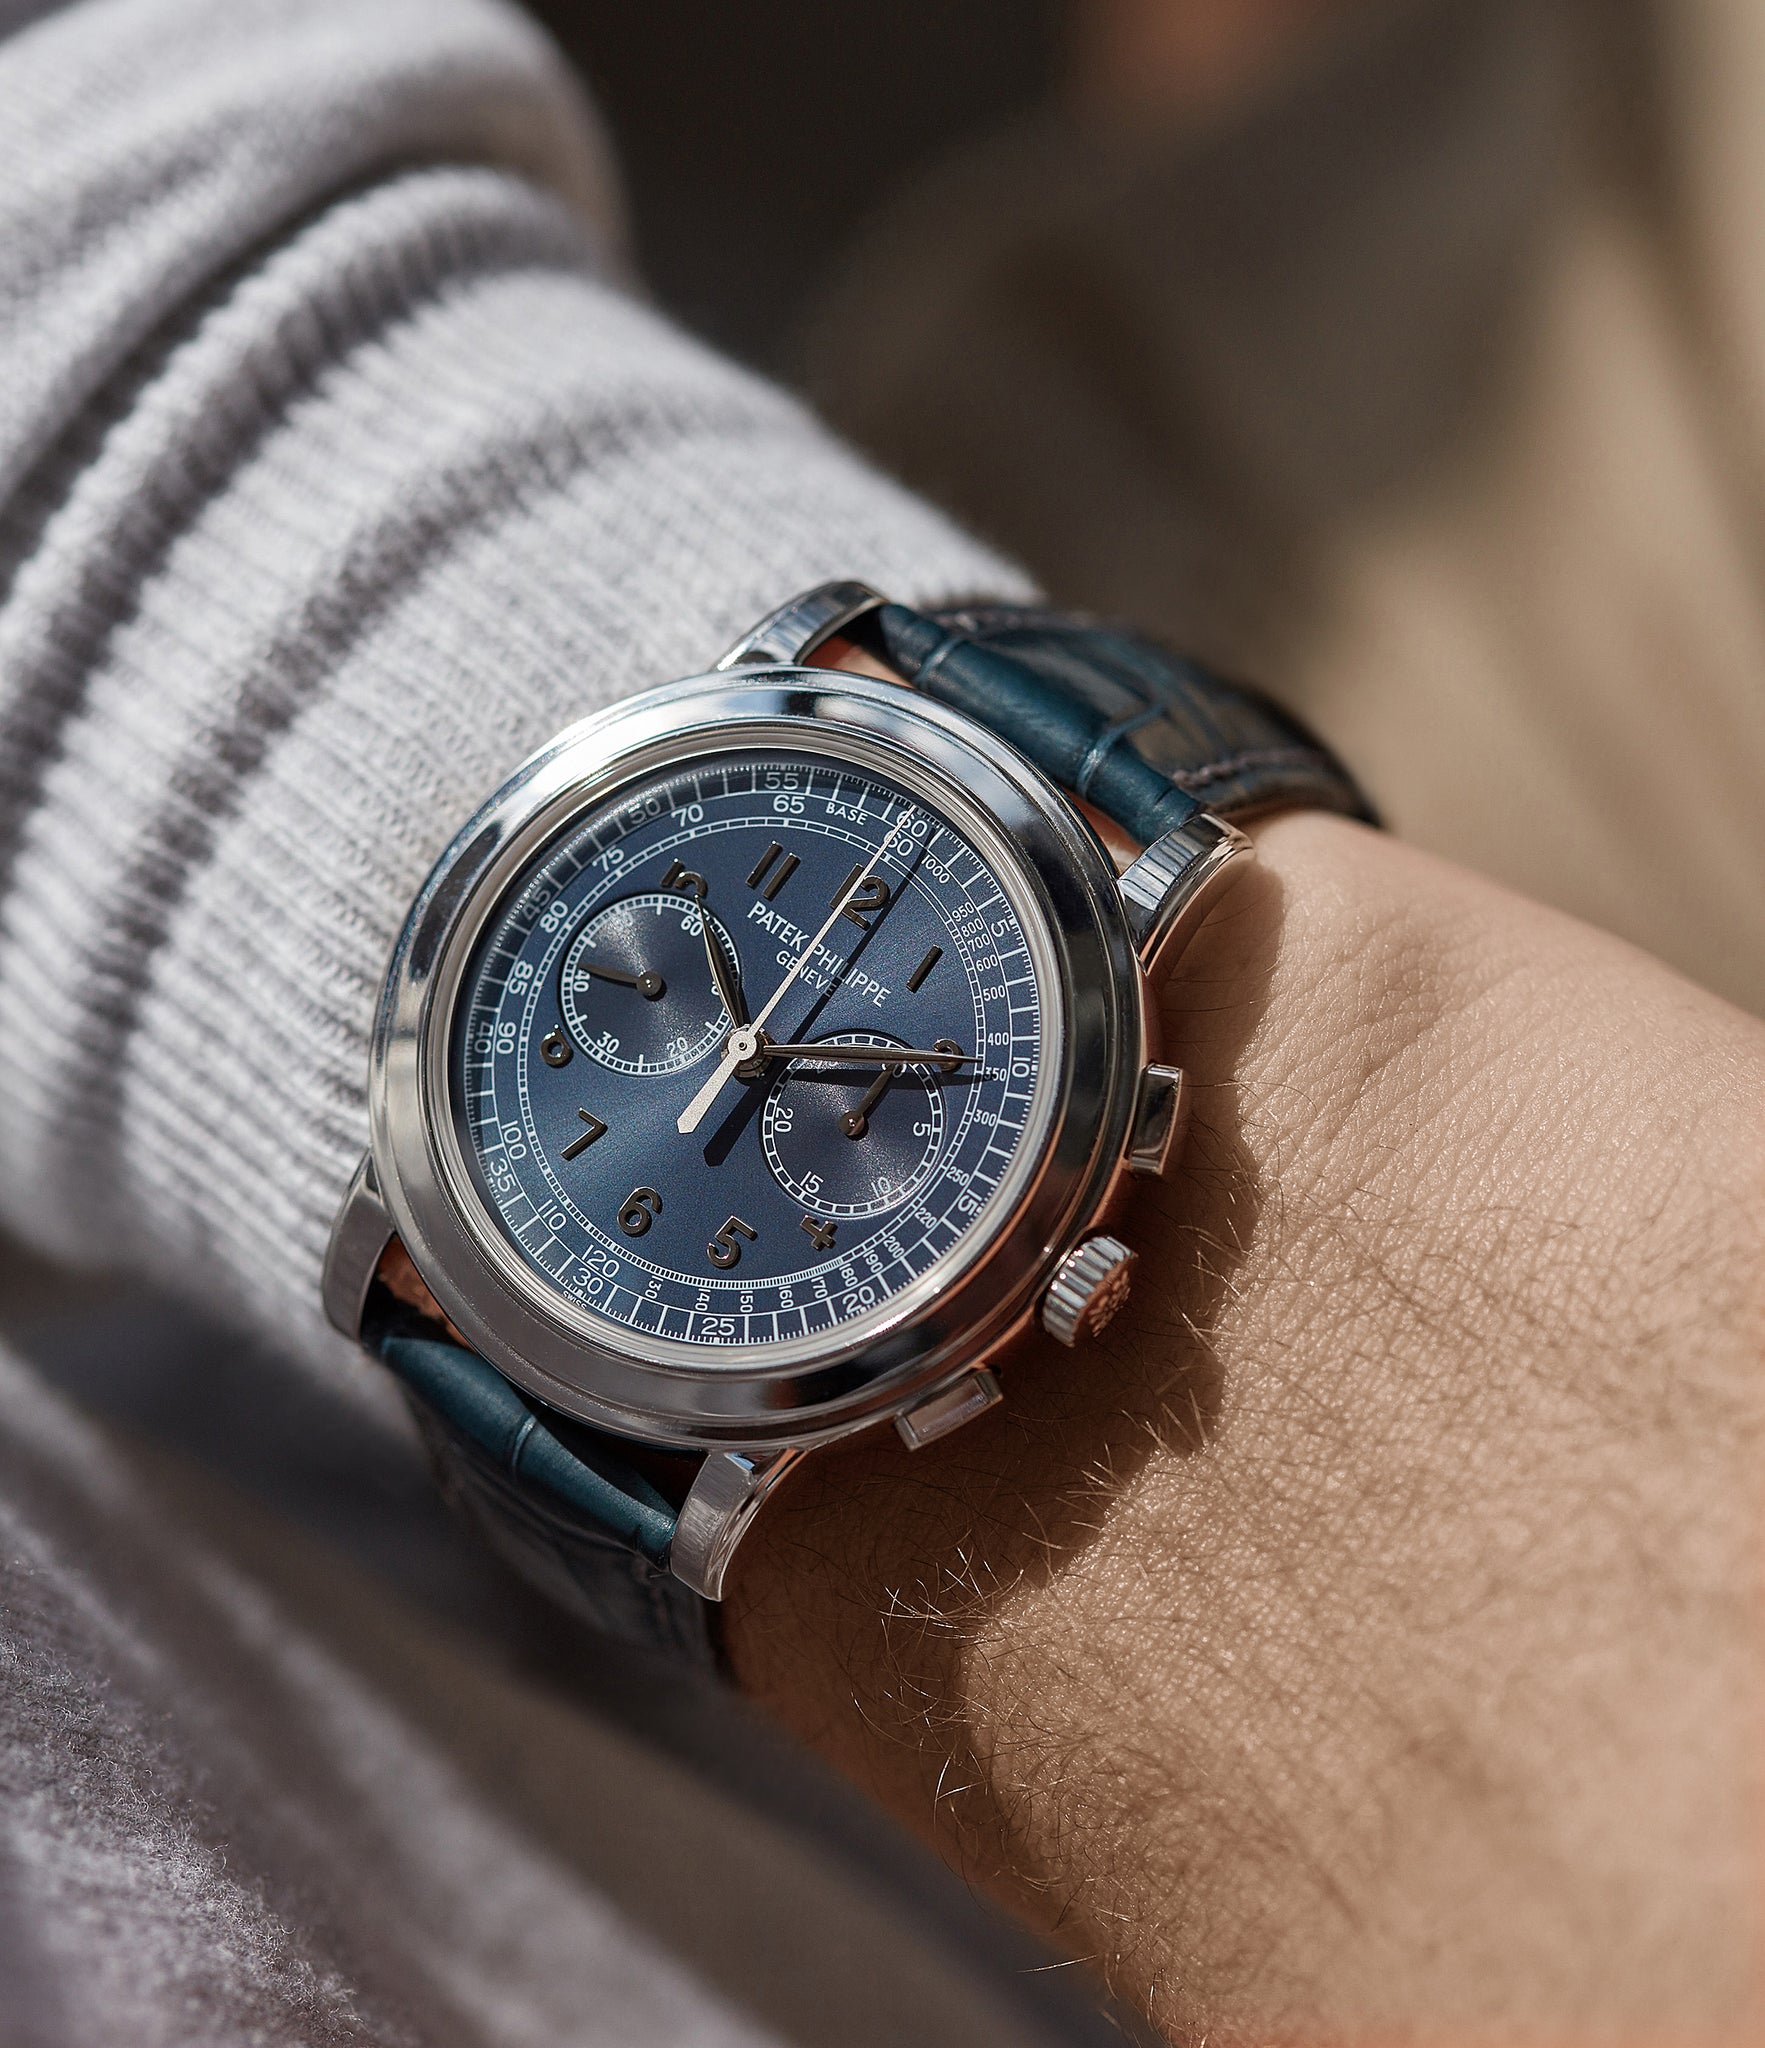 on the wrist Patek Philippe 5070P Chronograph rare platinum 42mm luxury watch for sale online at A Collected Man London UK specialist of rare watches